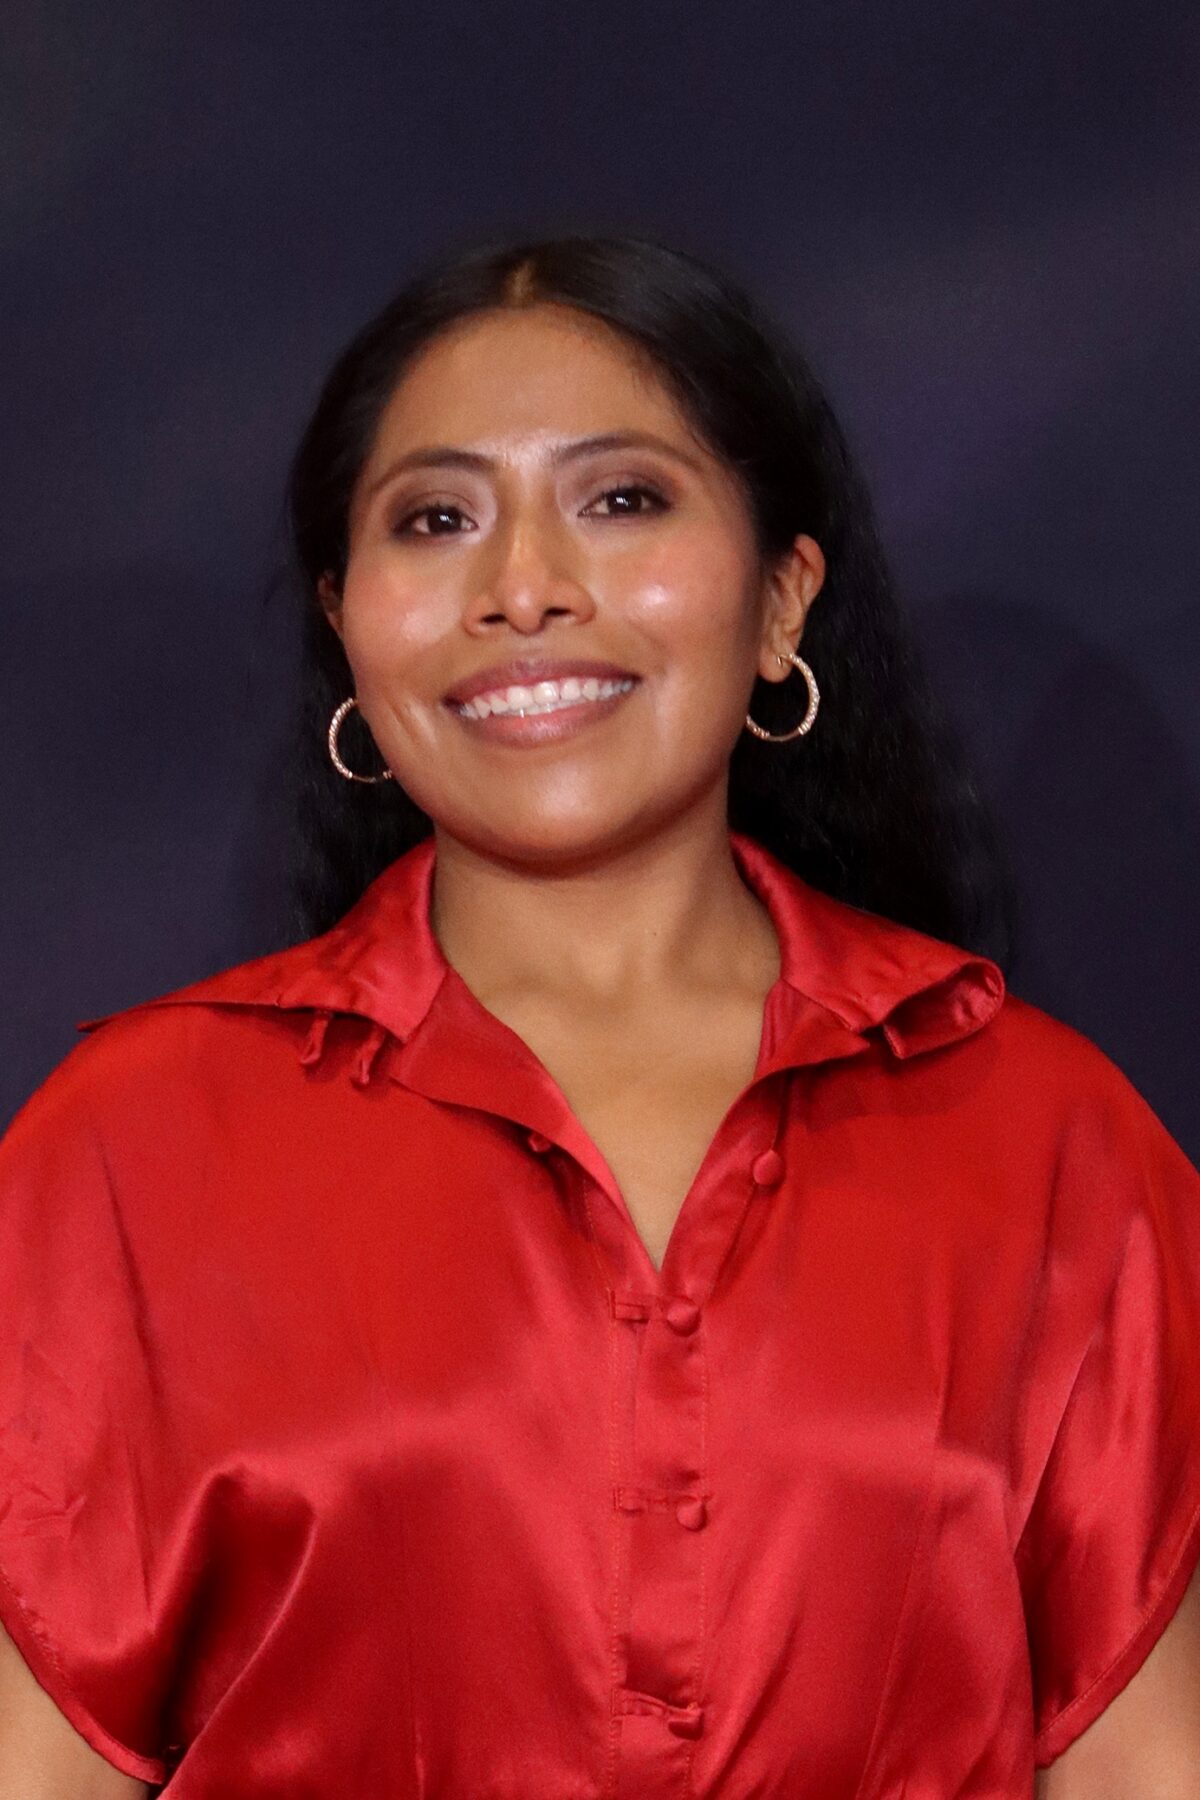 MEXICO CITY, MEXICO - SEPTEMBER 14: Yalitza Aparicio poses for photos during a red carpet event at Centro Cultural Los Pinos on September 14, 2021 in Mexico City, Mexico. (Photo by Adrián Monroy/Medios y Media/Getty Images)